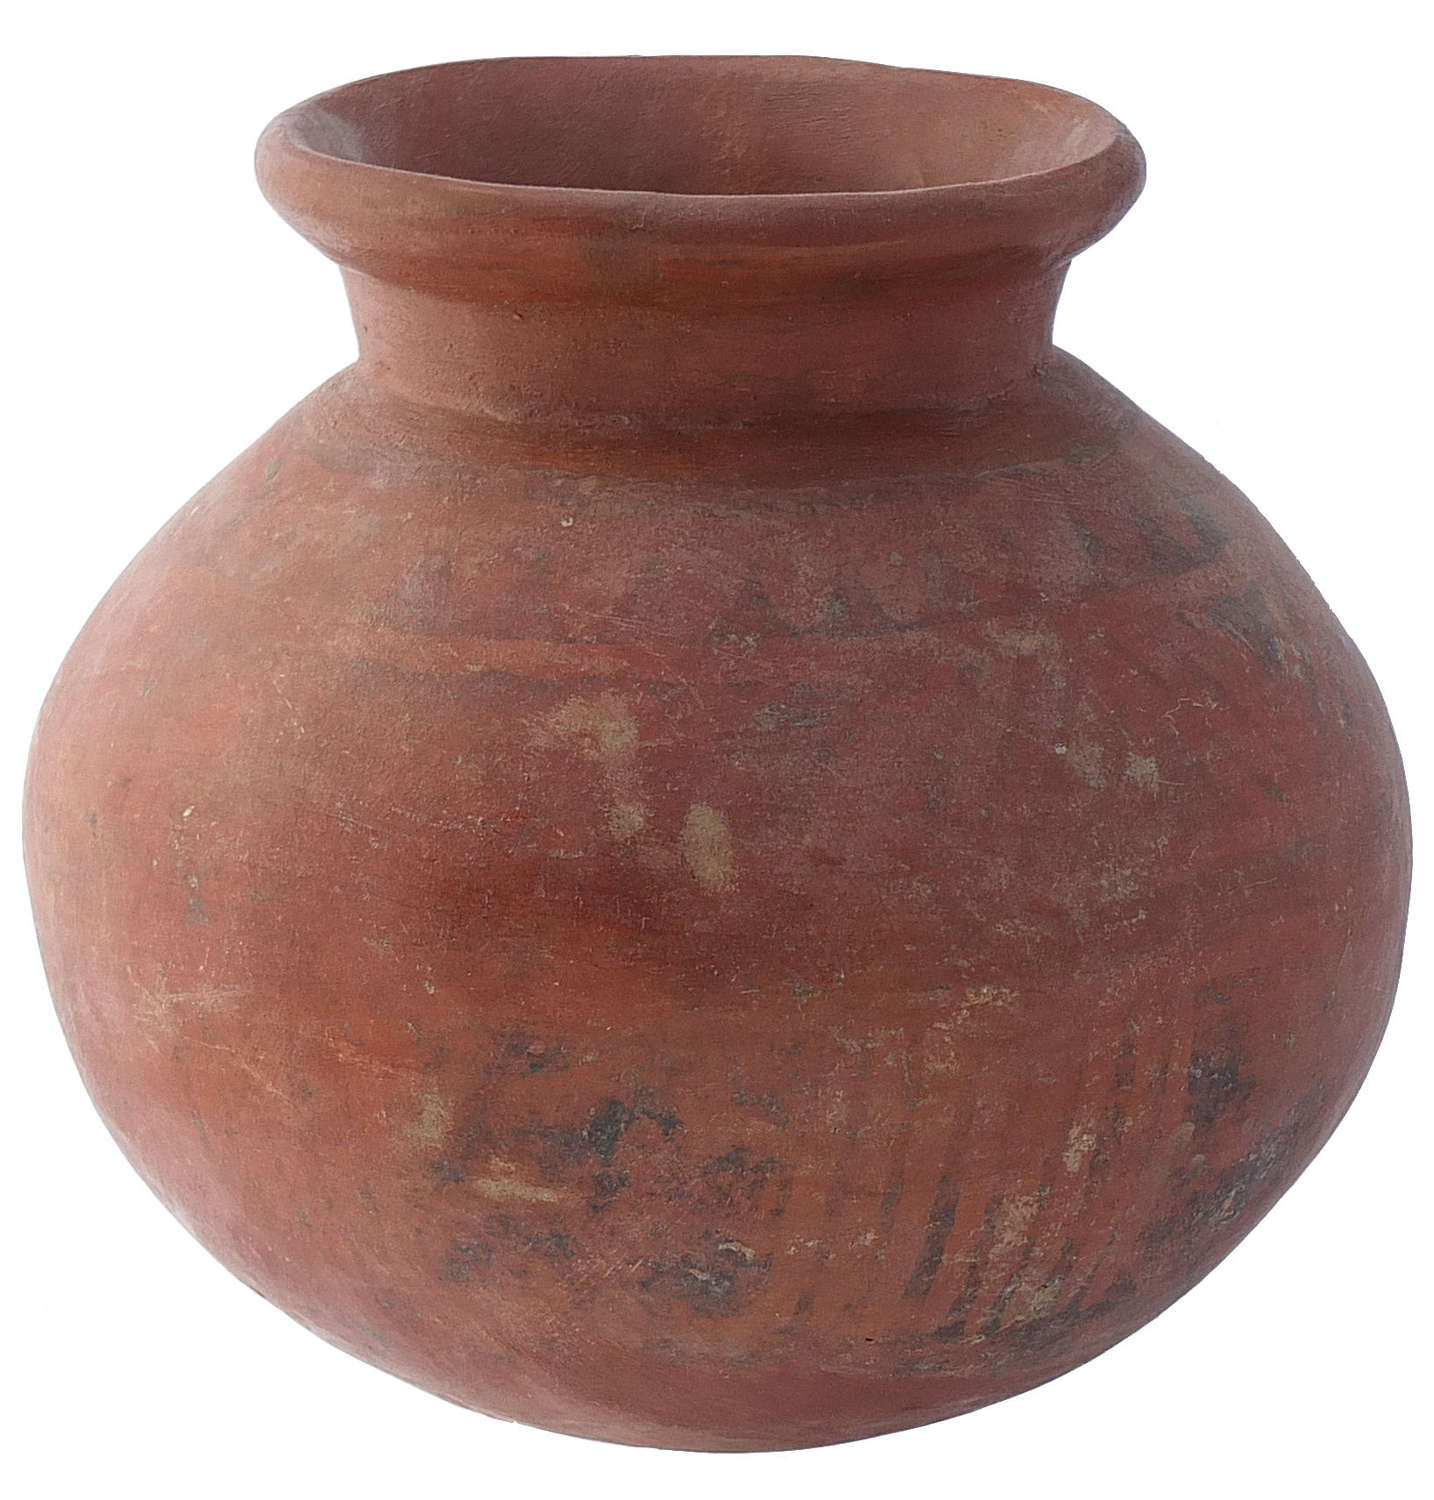 A good-sized Chiriqui red ware olla, Panama, c. 800-1200 A.D.